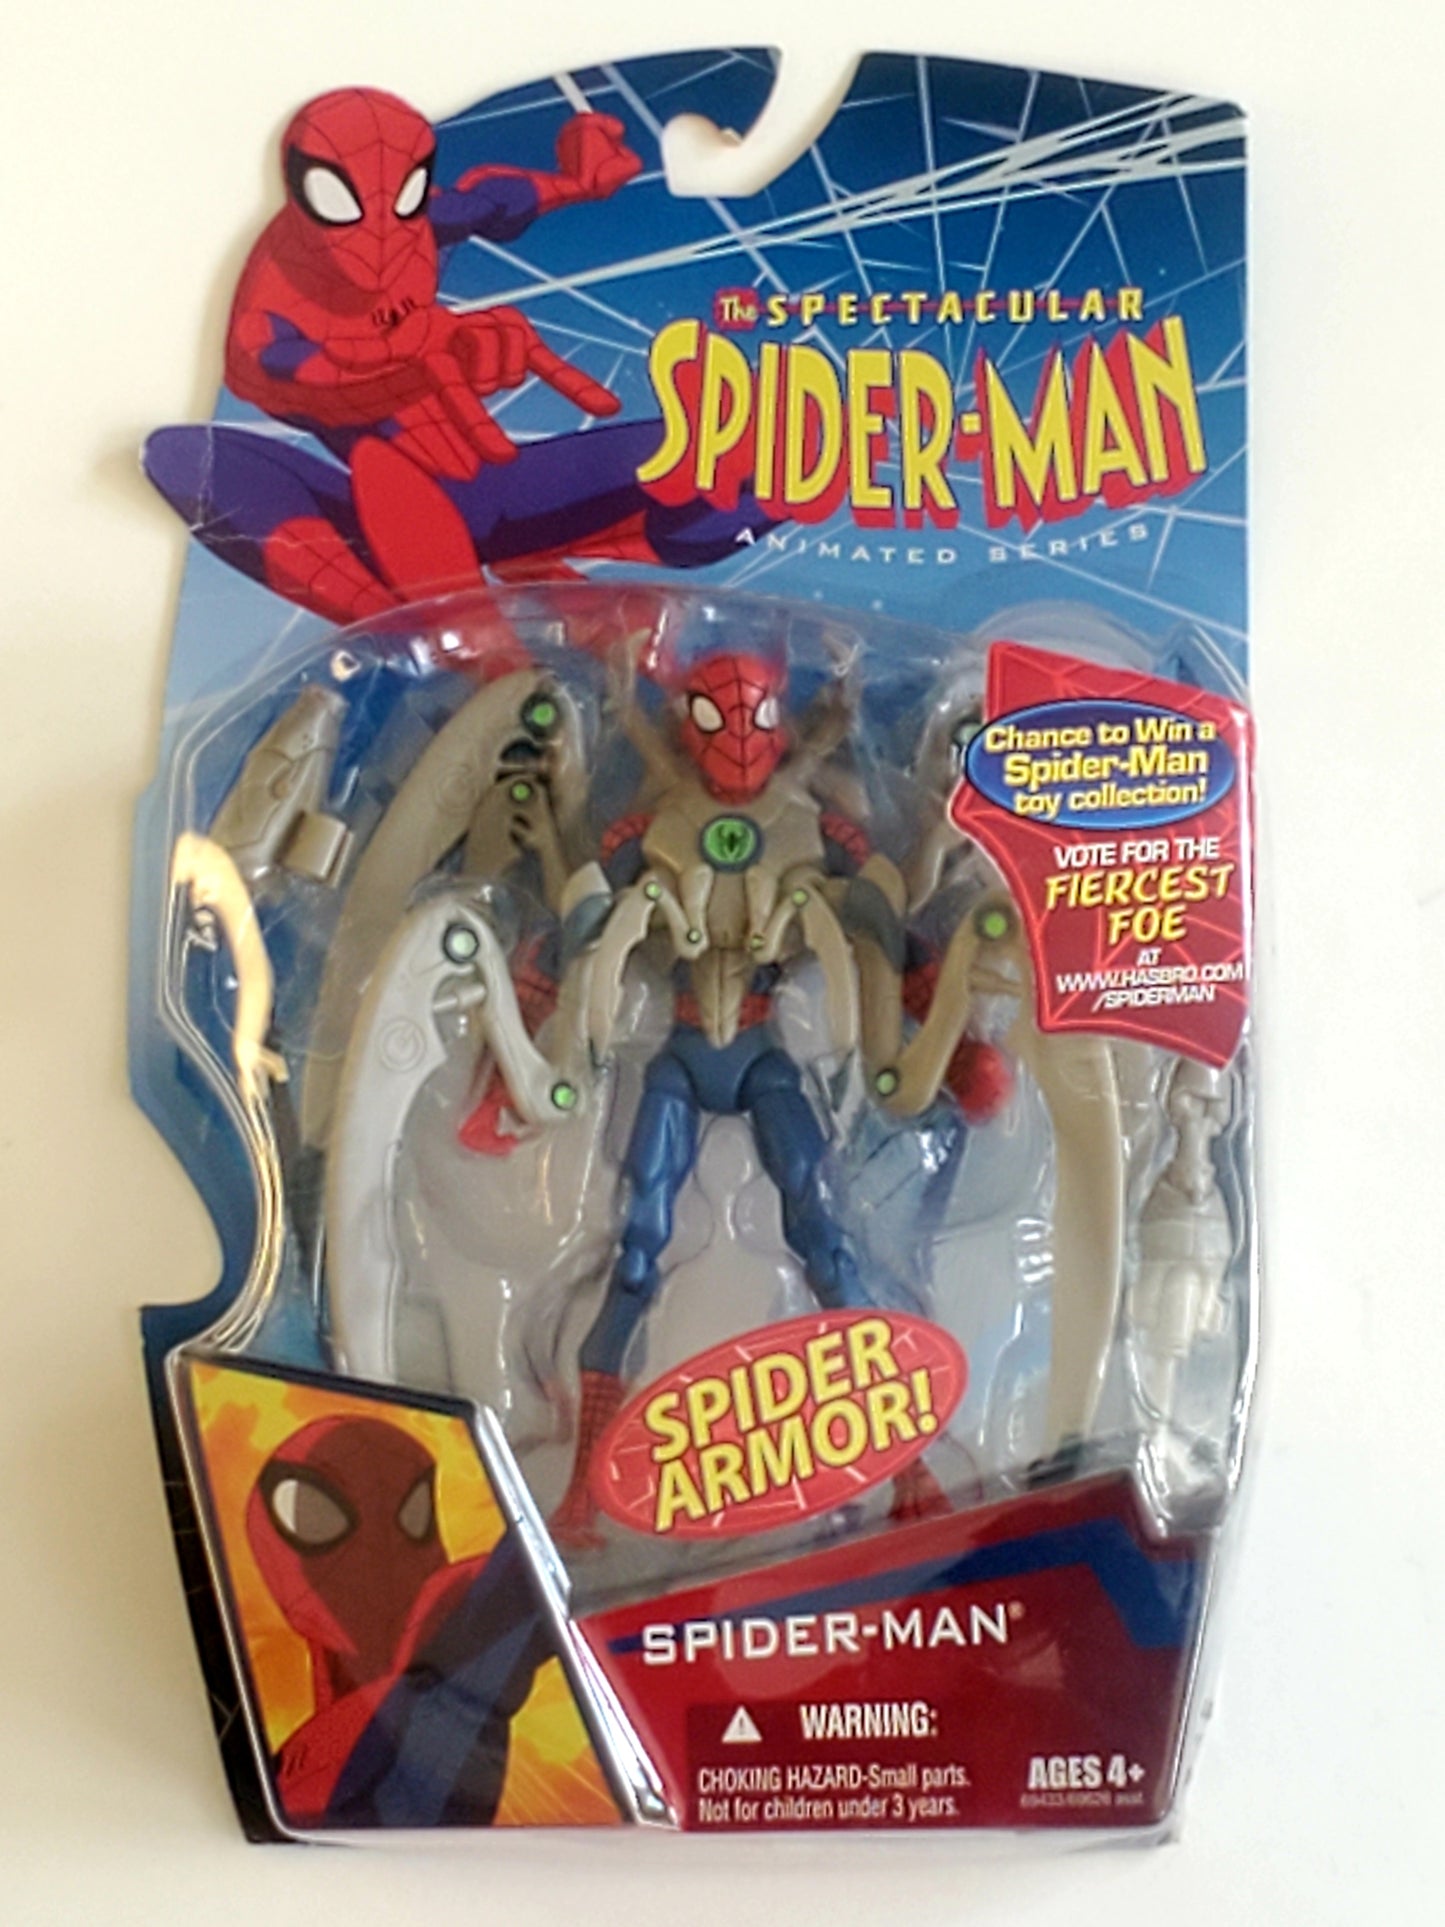 Spider-Man with Spider Armor Action Figure from the Spectacular Spider-Man Animated Series